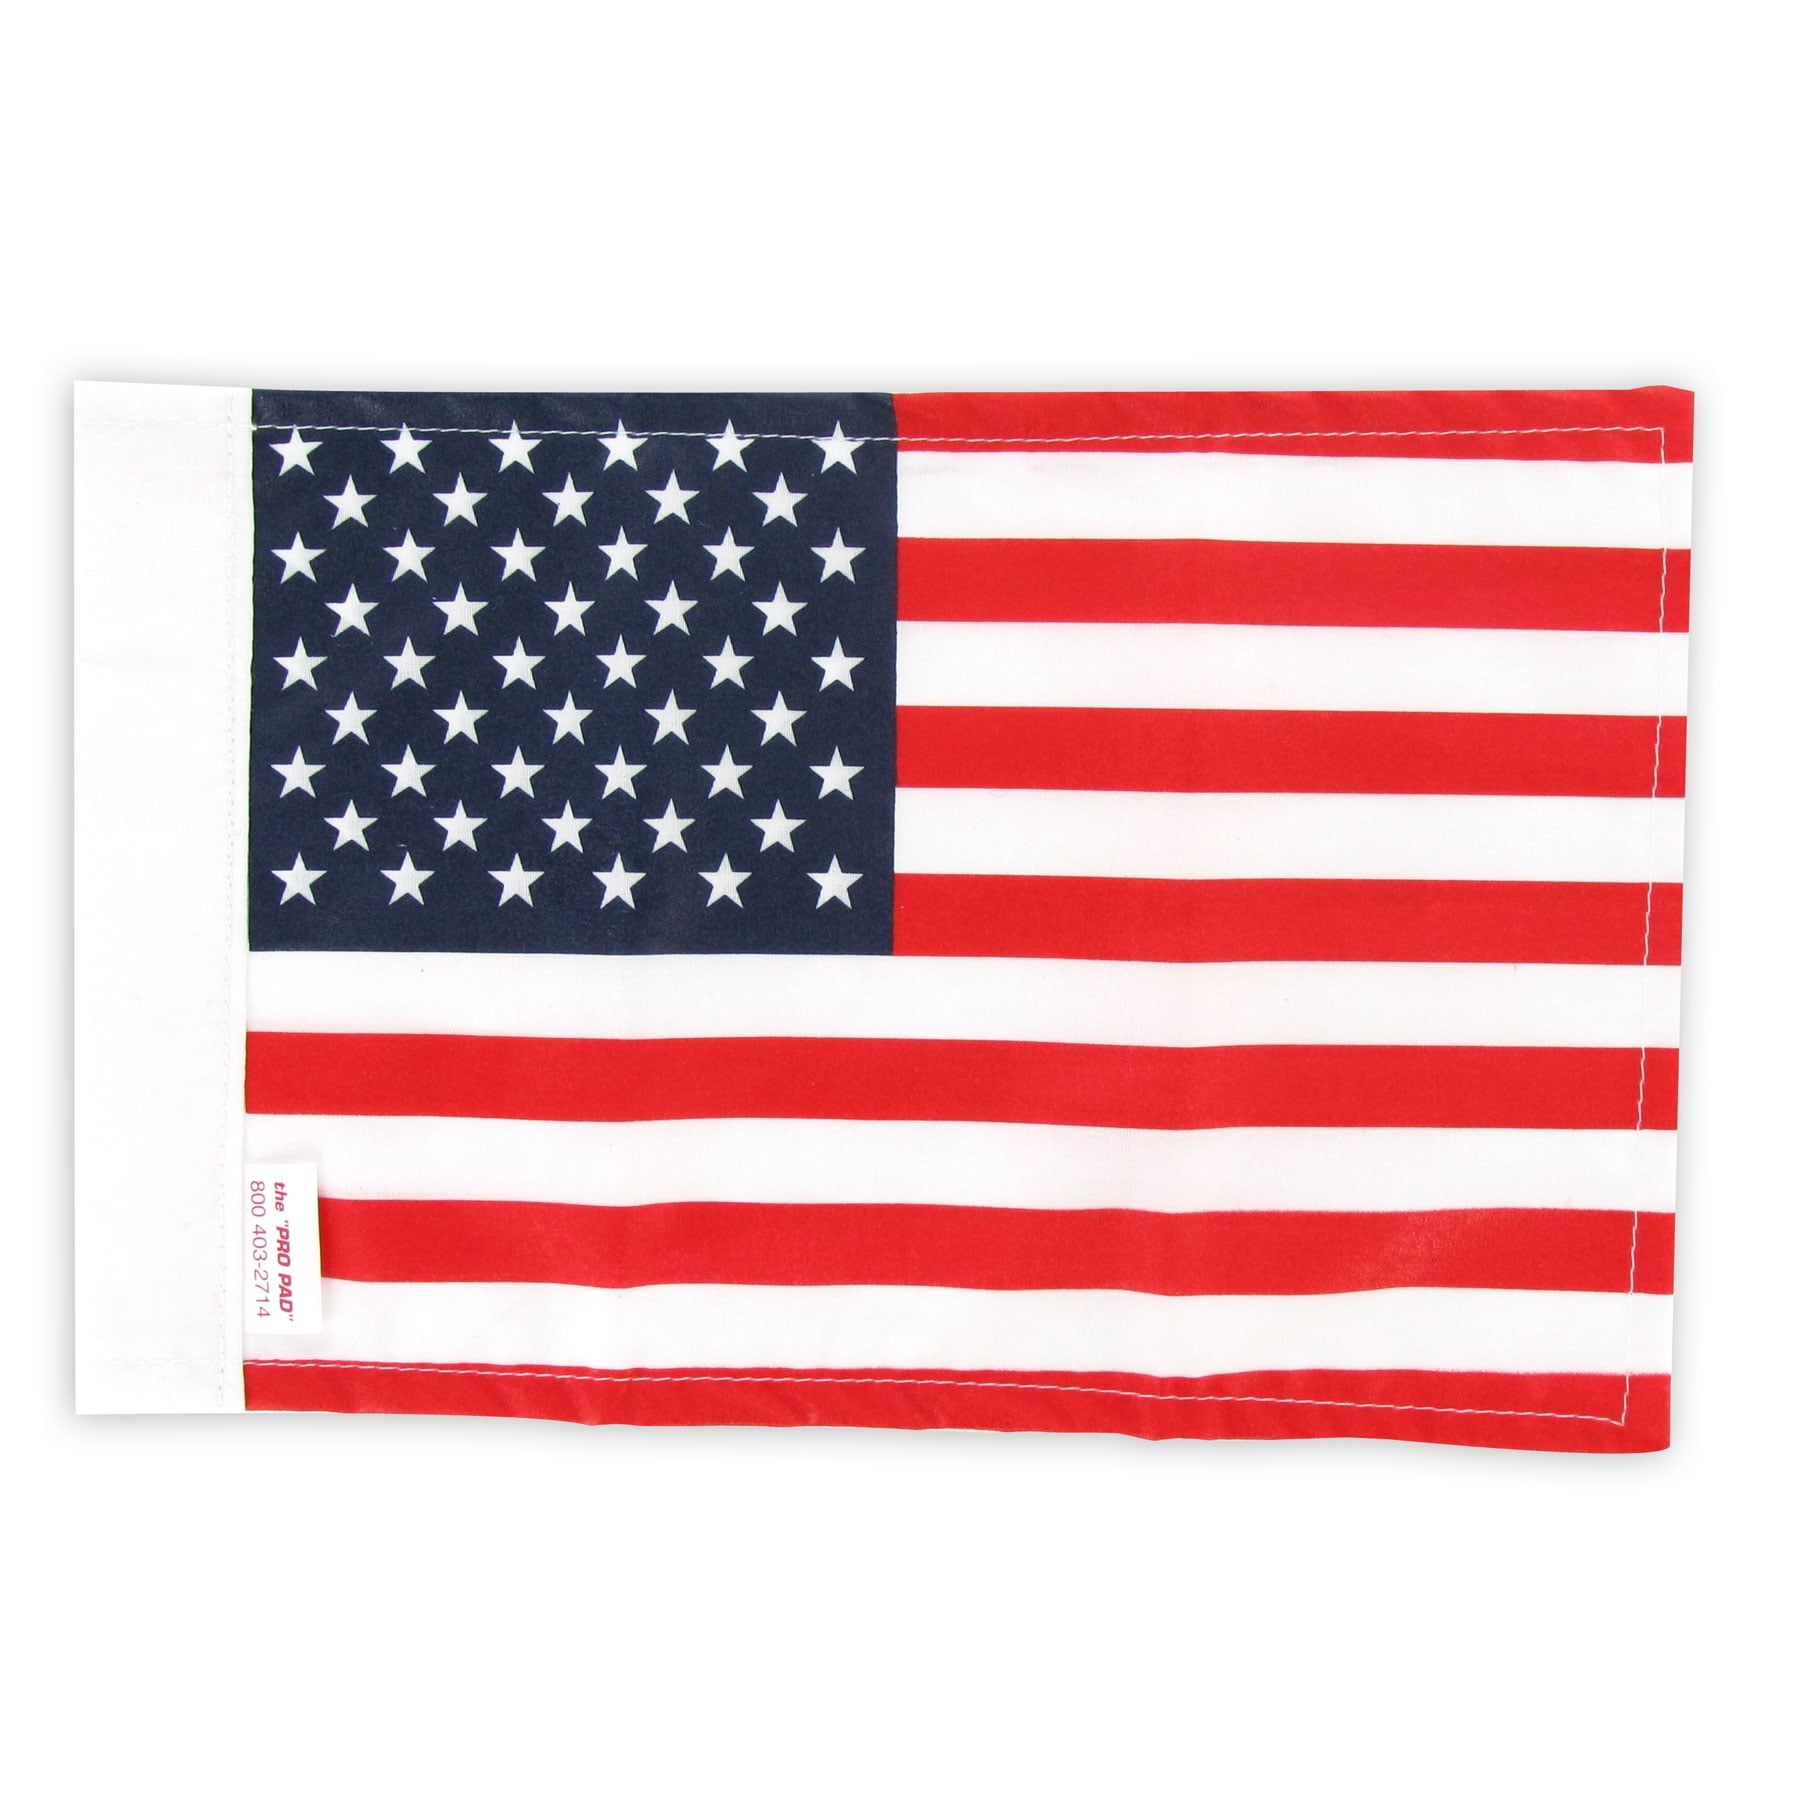 4 American Flag Pole Sleeve Sleeved Motorcycle Flag 9” X 14” United States Flags 